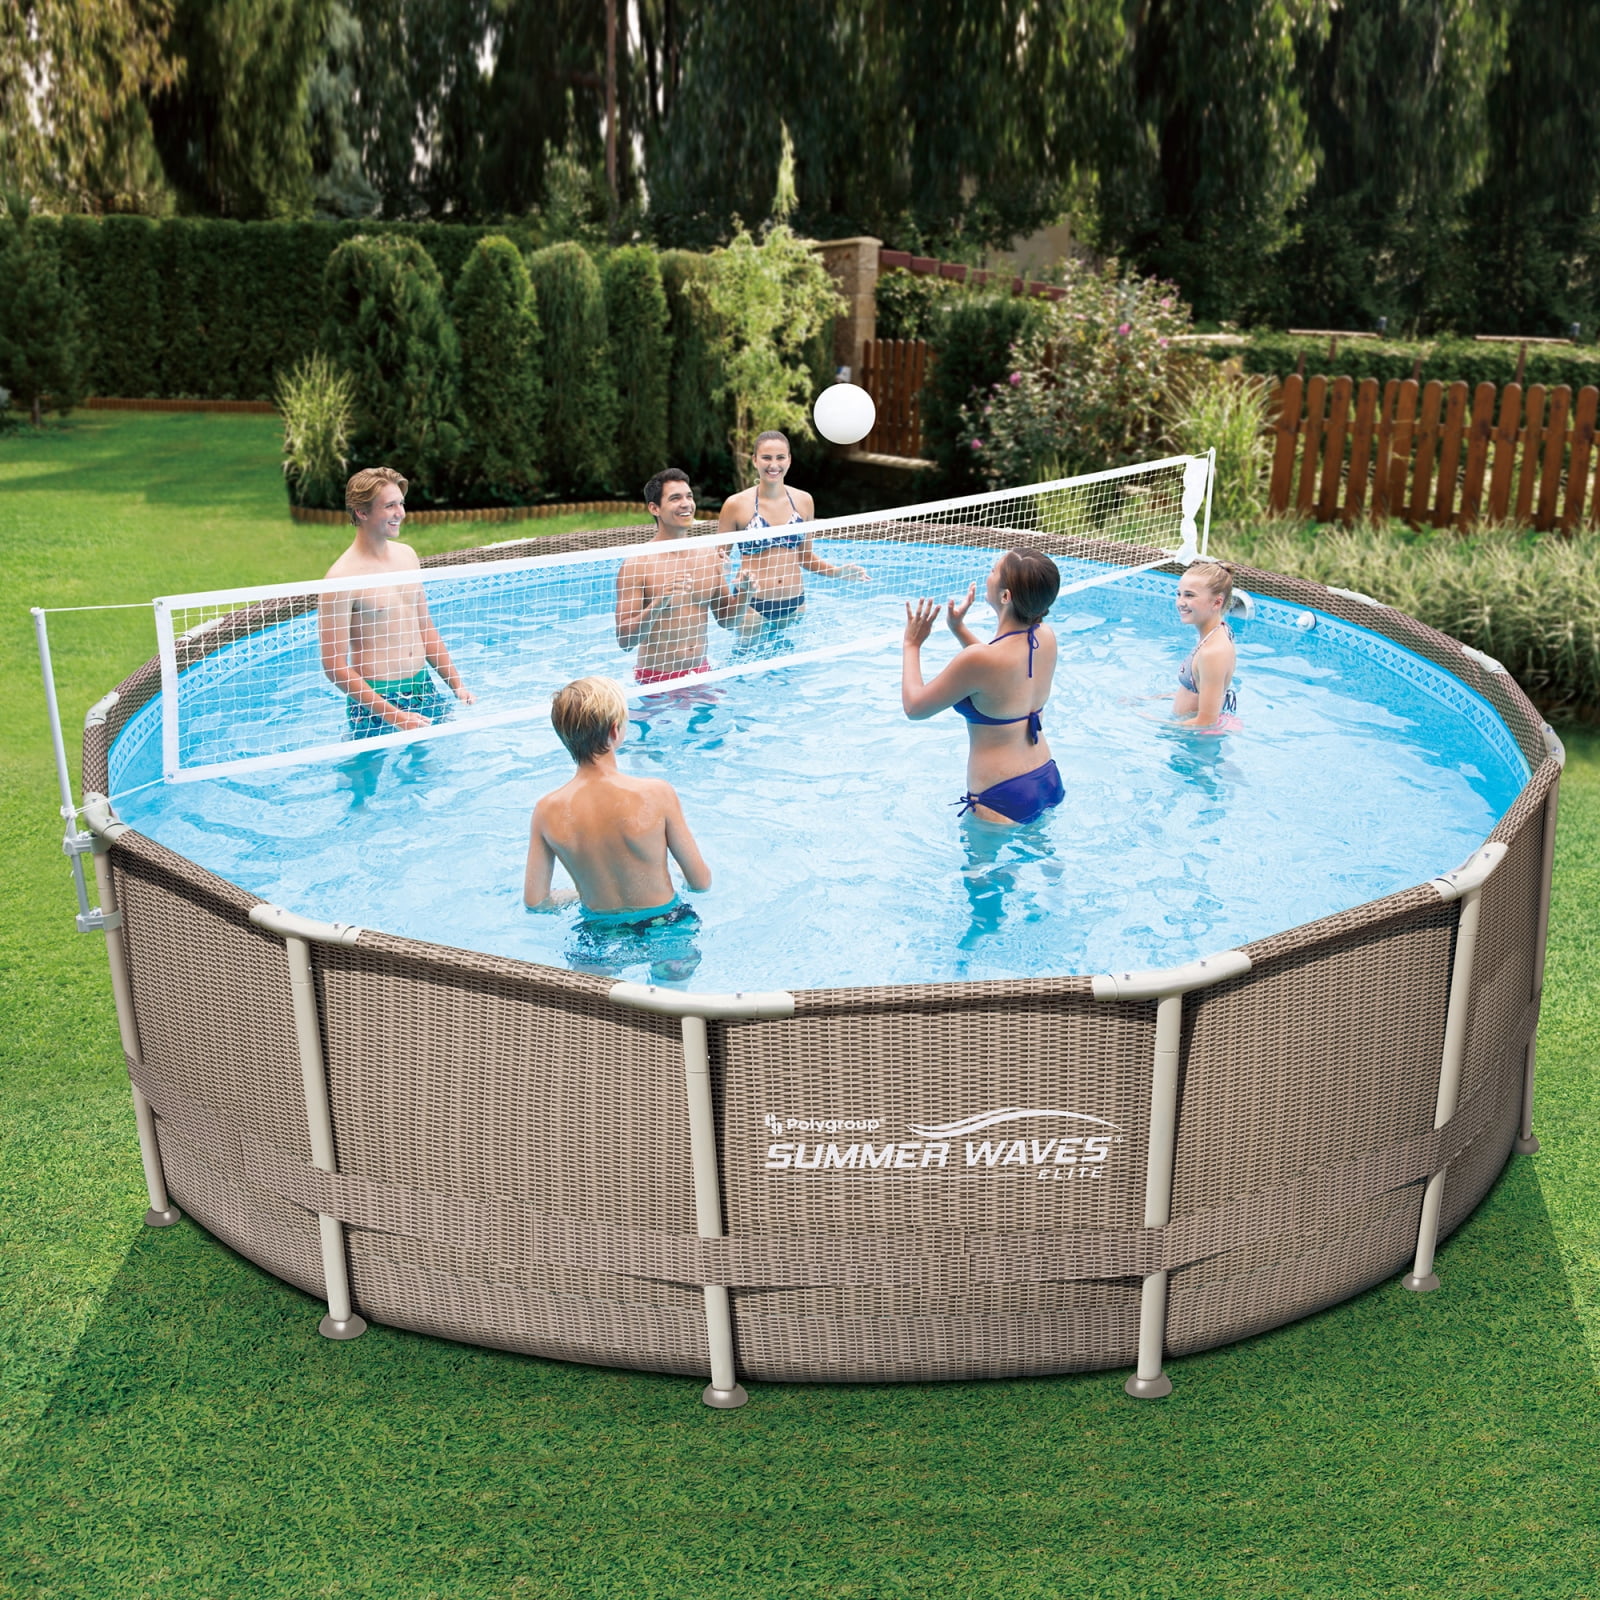 Summer Waves Volleyball for 10'-20' Metal Frame Above Pools Walmart.com